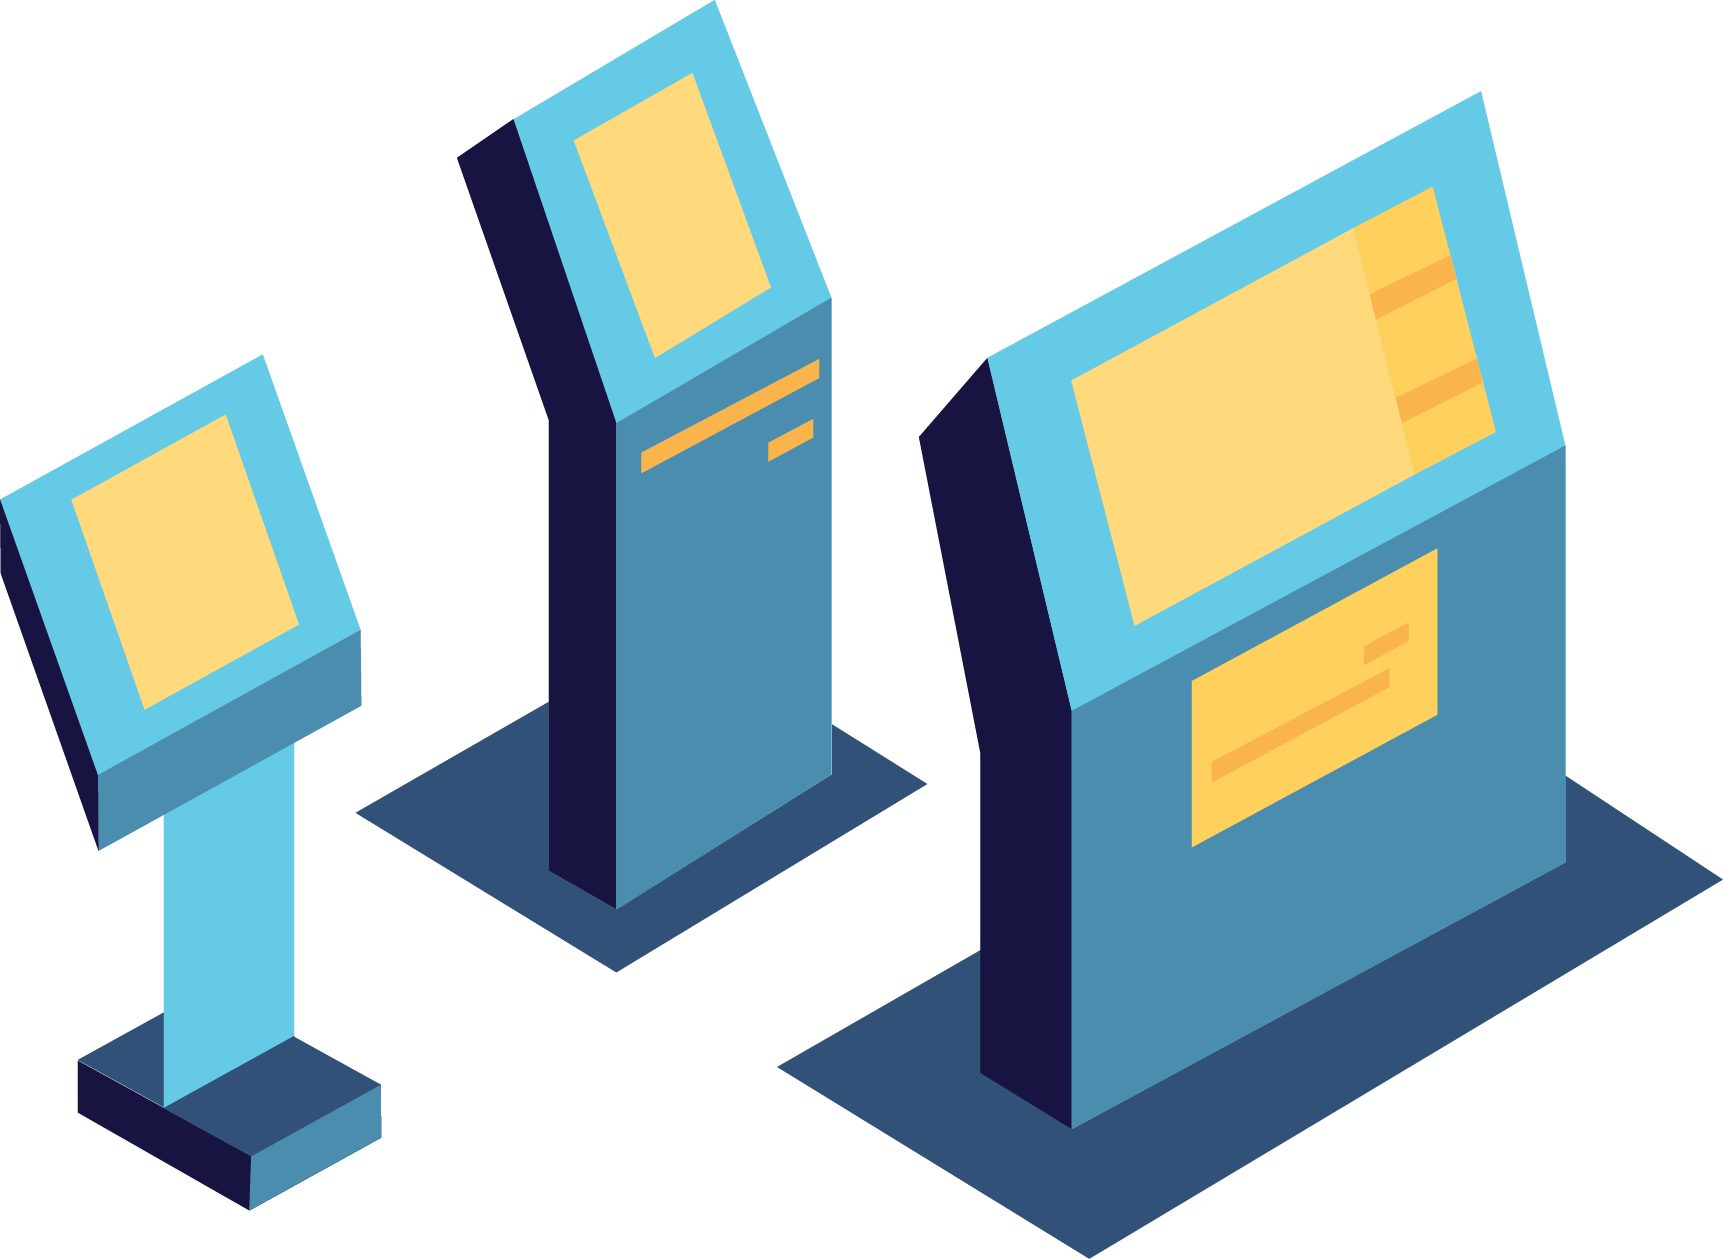 Illustration of three models of payment kiosks